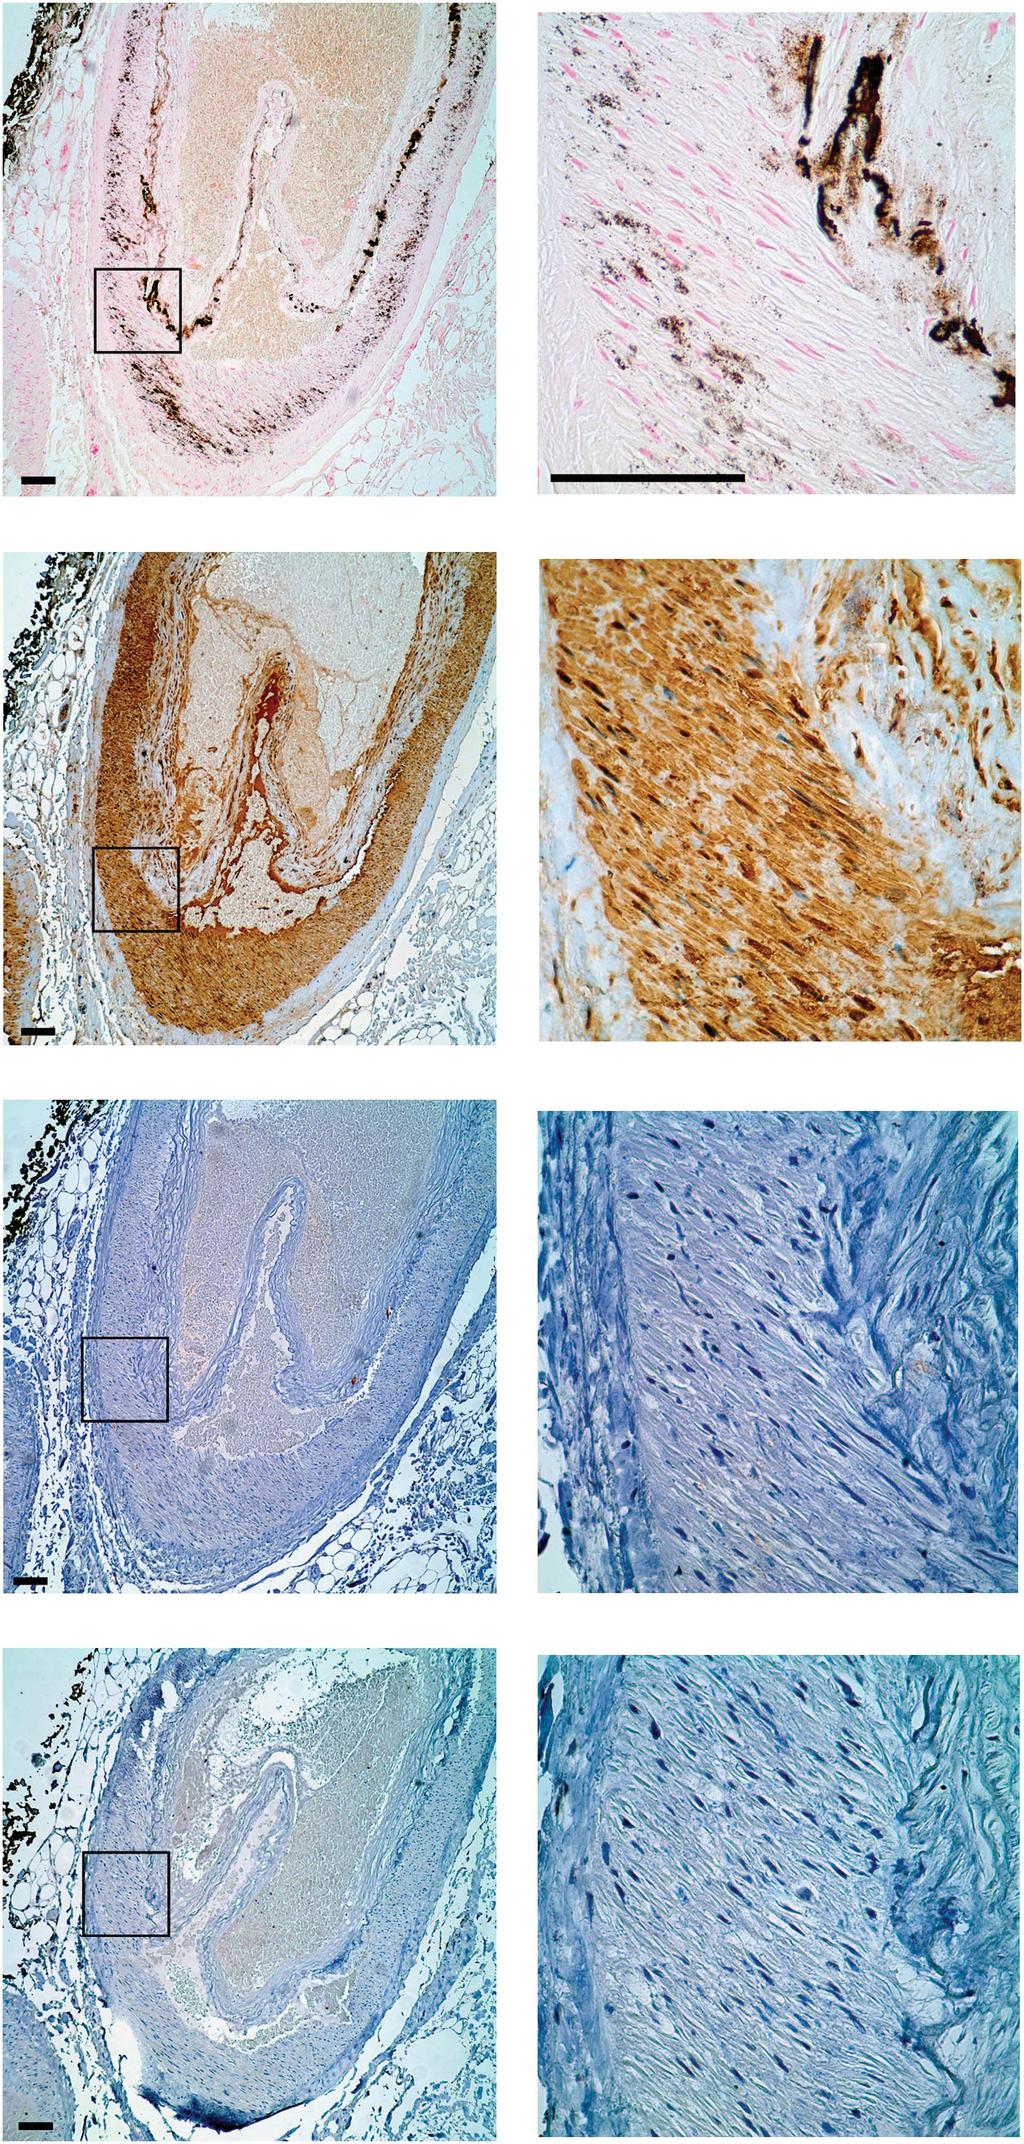 Table 3 Immunohistochemical analysis of calcified breast arteries Specimen Osteocalcin staining Runx2 staining 1 2 3 4 5 6 7 8 9 10 11 12 13 14 15 16 17 18 19 ND ; no VK match Yes ; no VK match ND ;